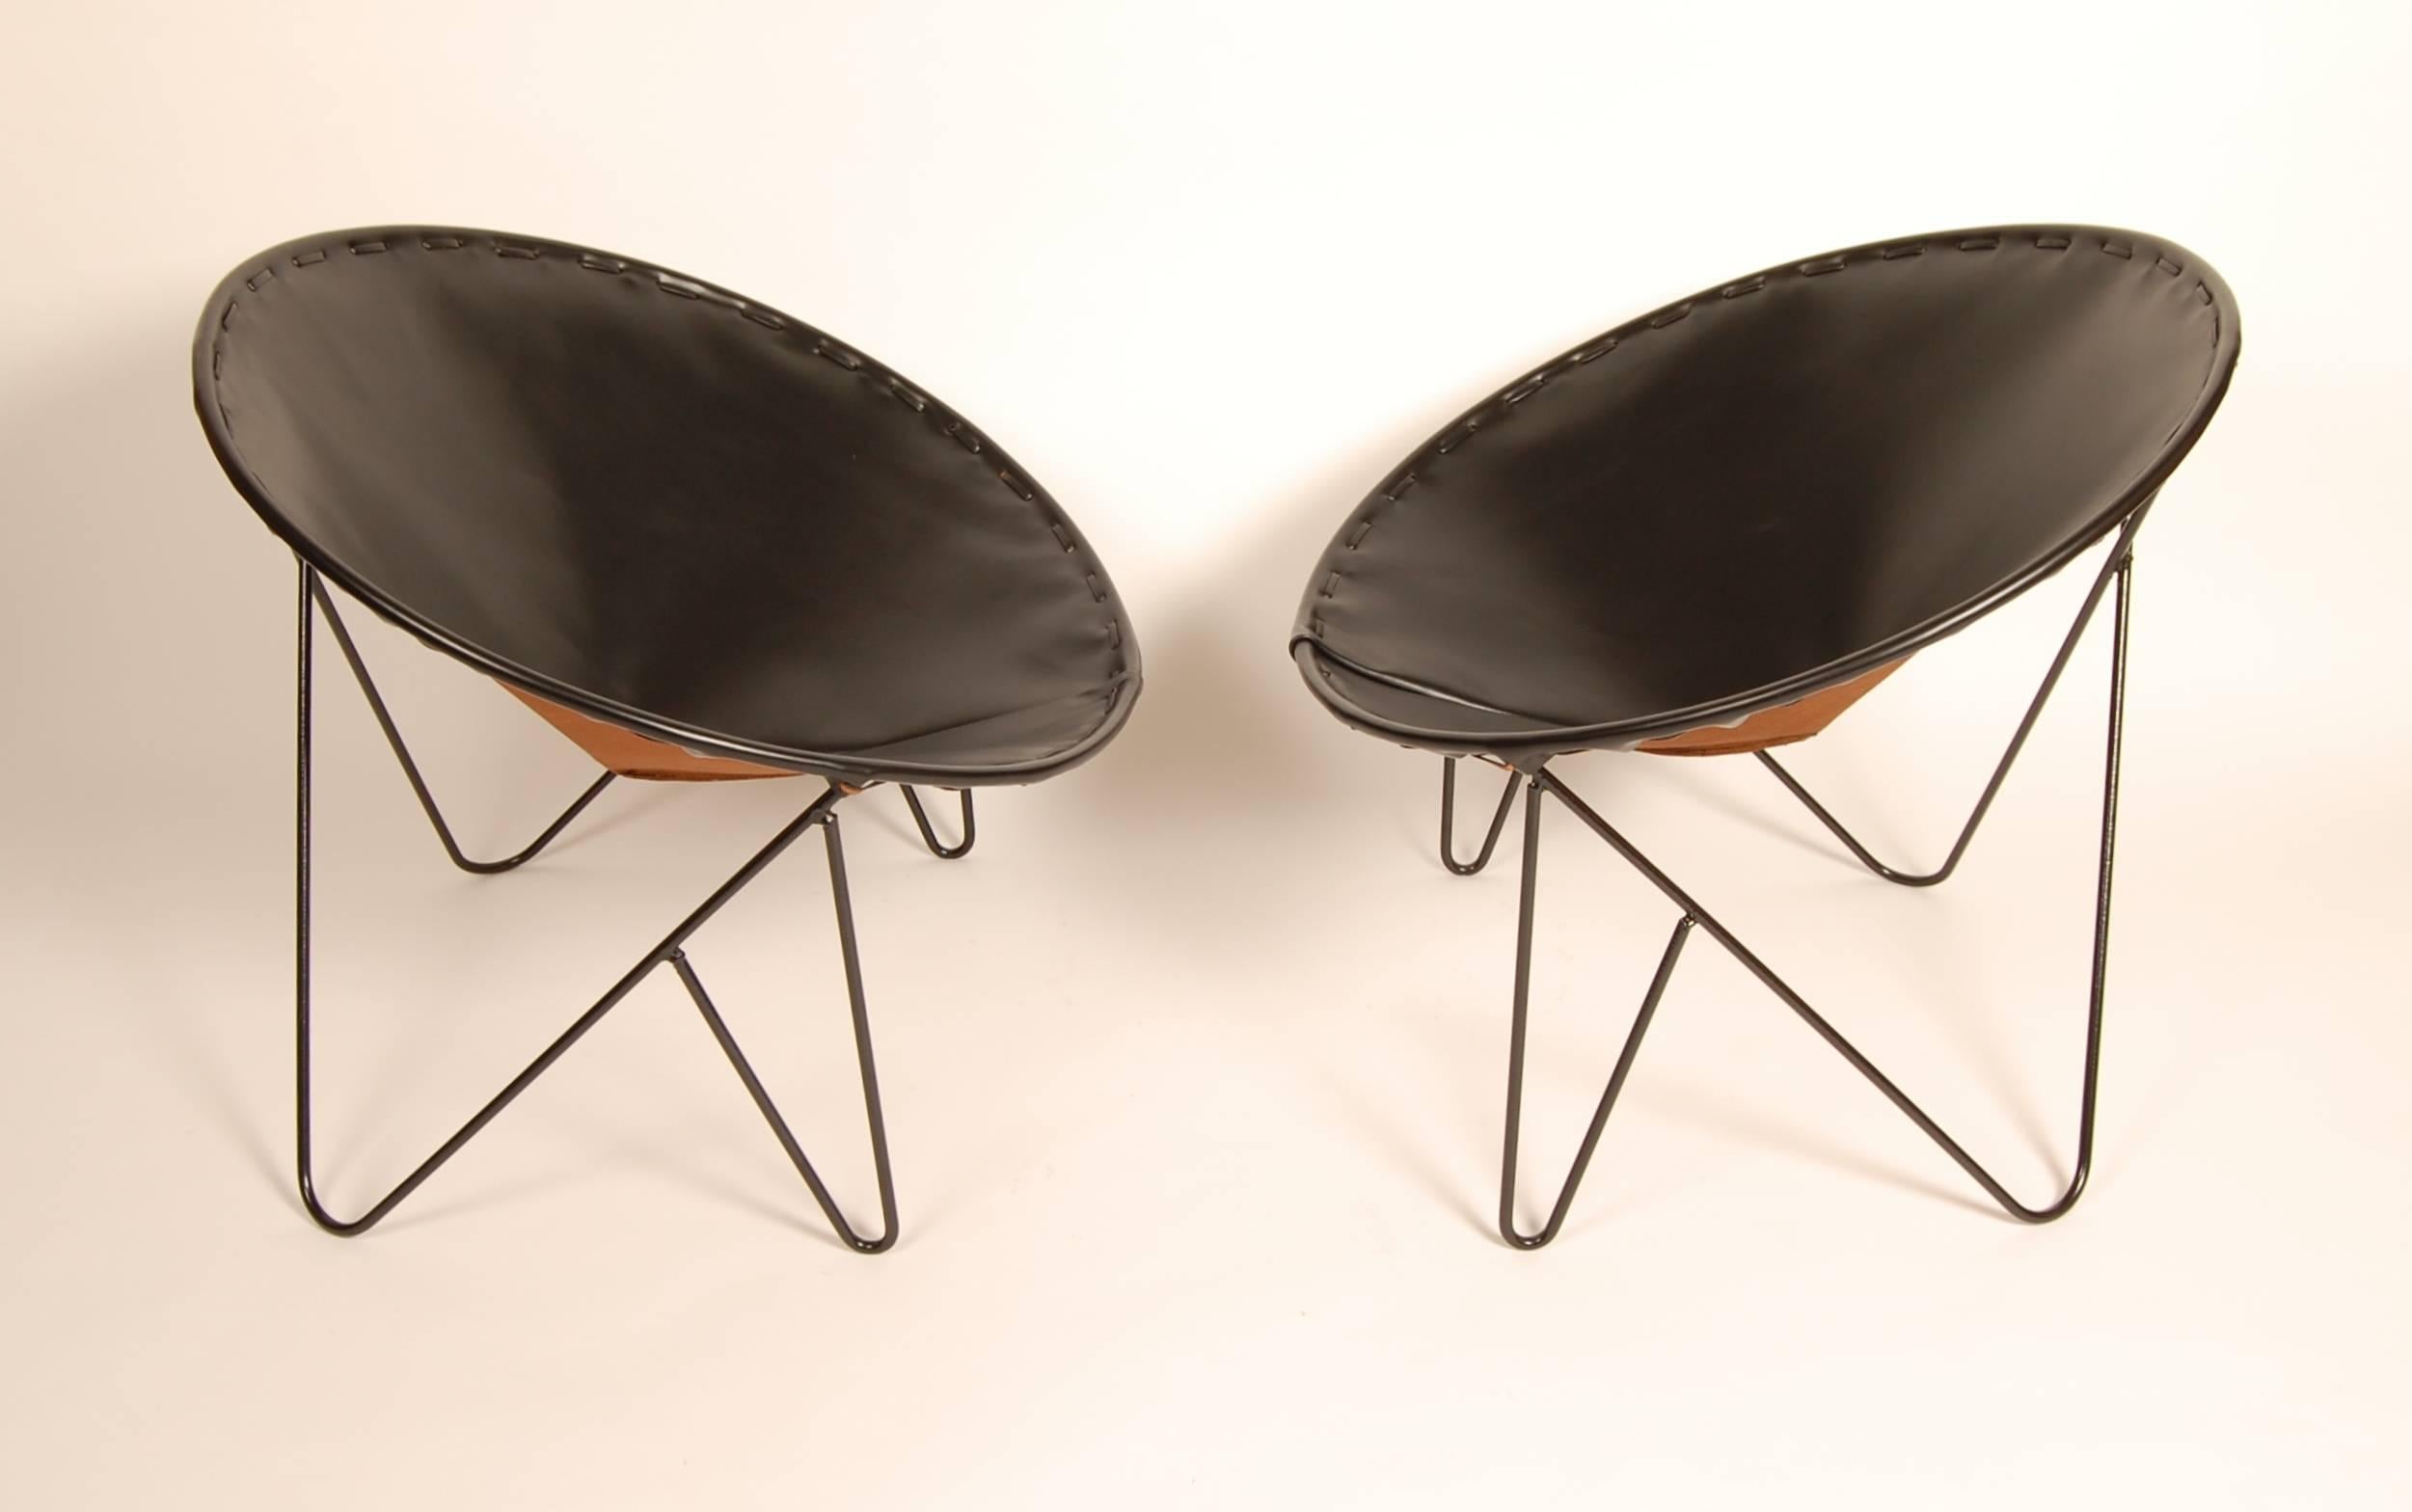 Restored 1950s iron lounge chairs with new leather upholstery and black powder-coated frames. Great geometry to the frames with new hand-stitched leather upholstery that makes them snap.